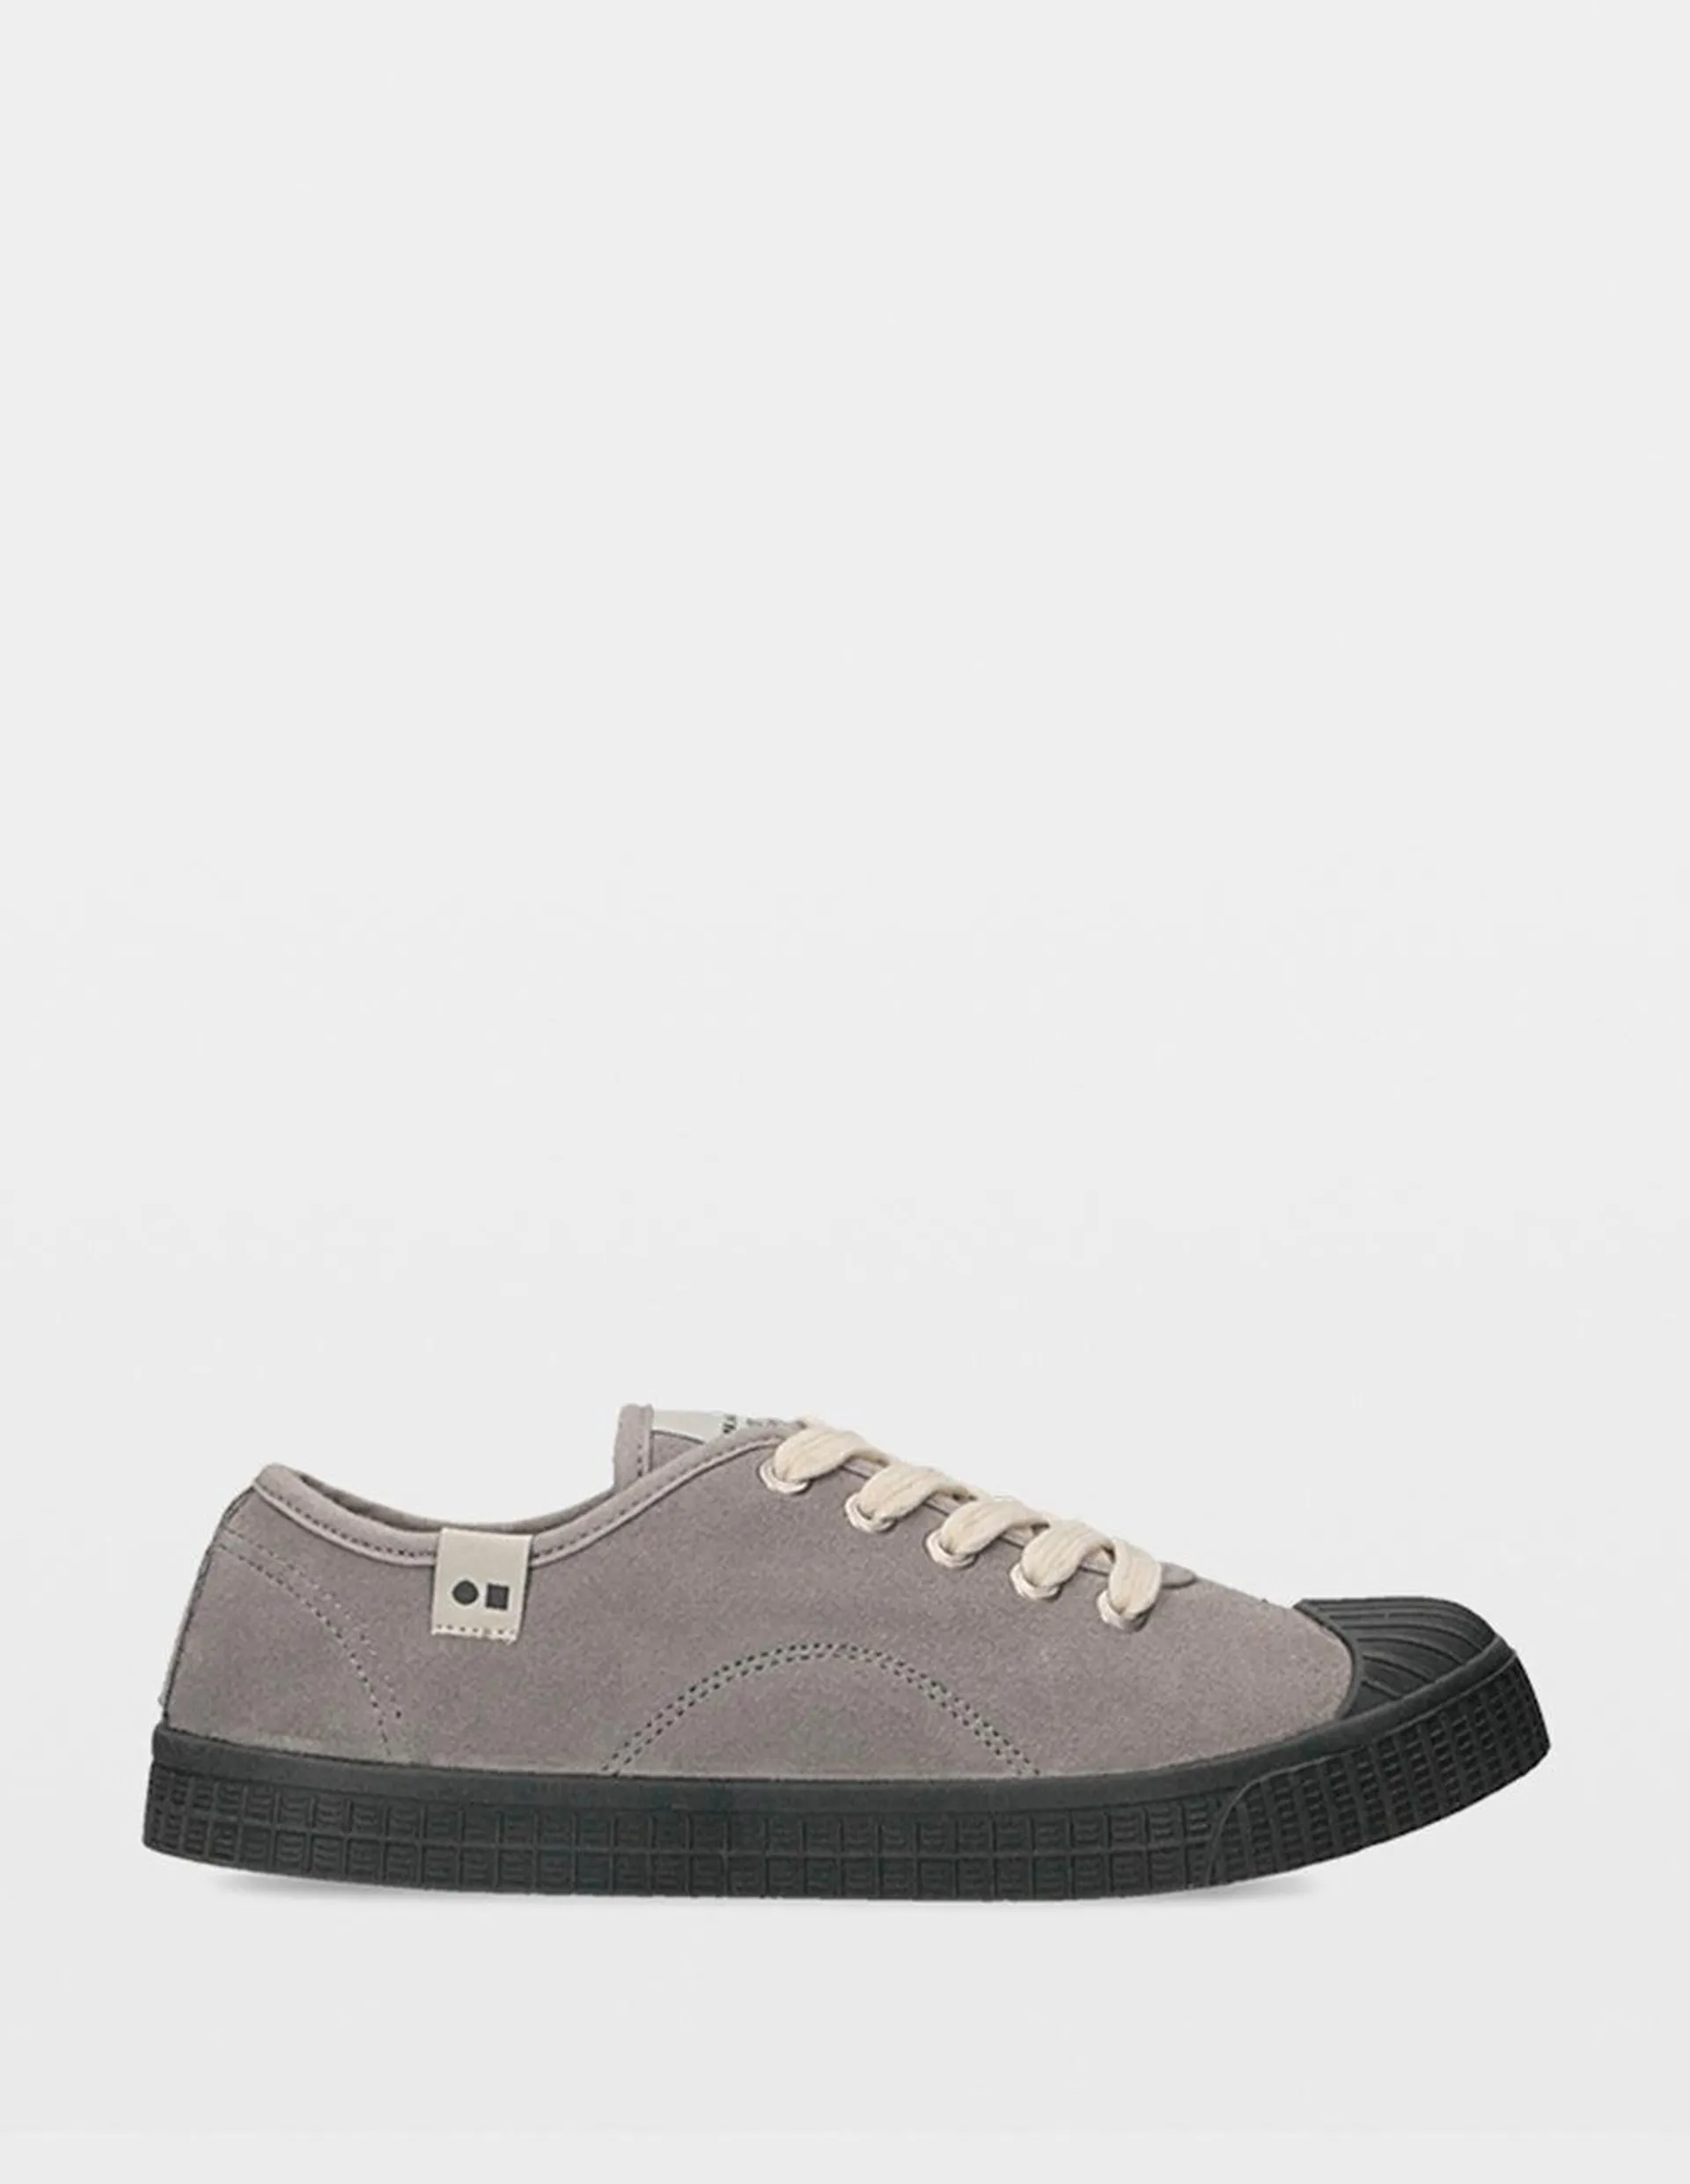 GREENDAY GREY LEATHER MUJER